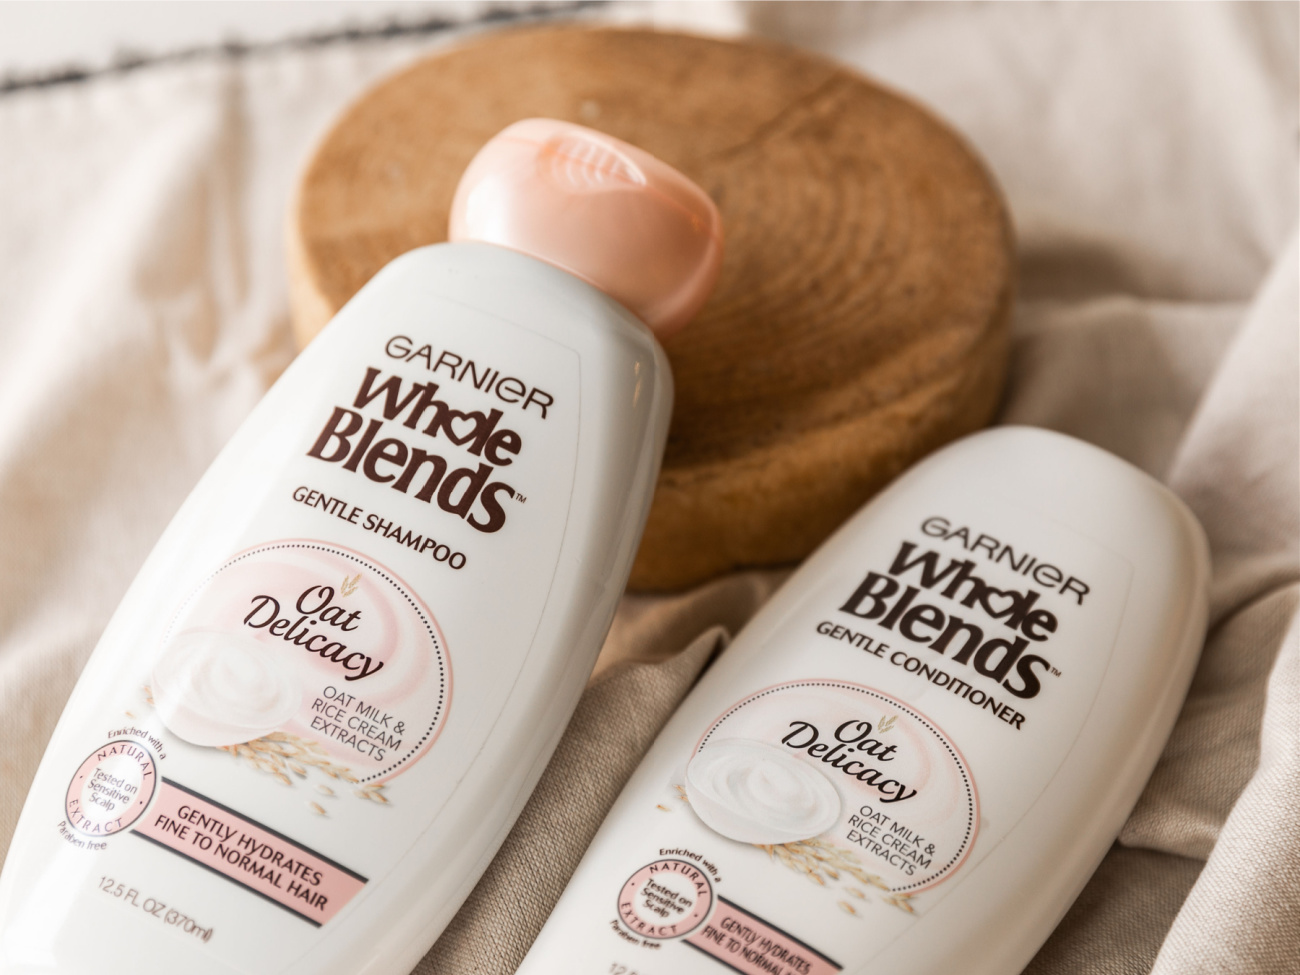 Garnier Whole Blends Haircare Only $1.50 At Publix (Regular Price $4.99)